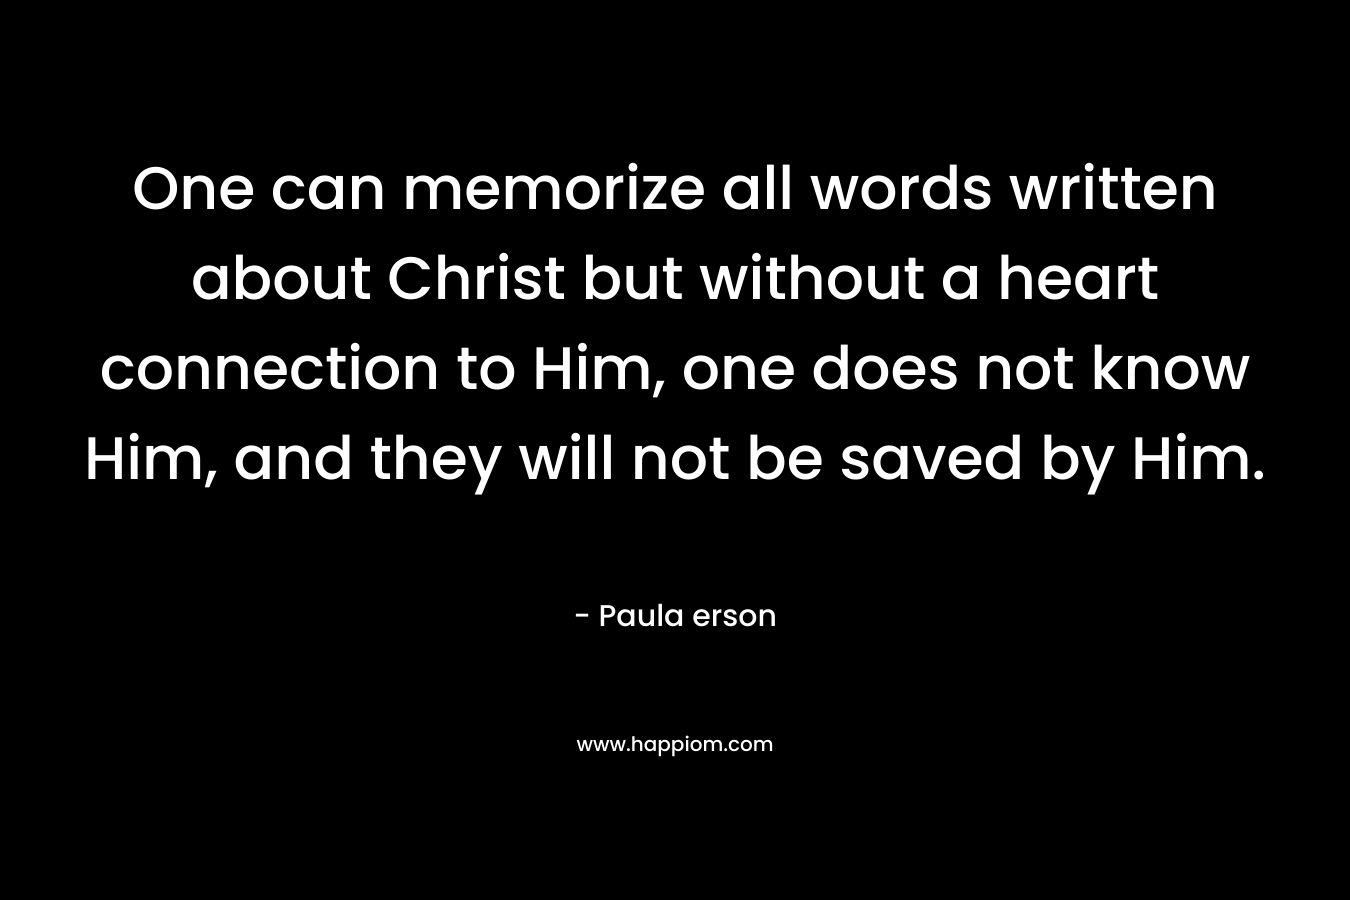 One can memorize all words written about Christ but without a heart connection to Him, one does not know Him, and they will not be saved by Him.